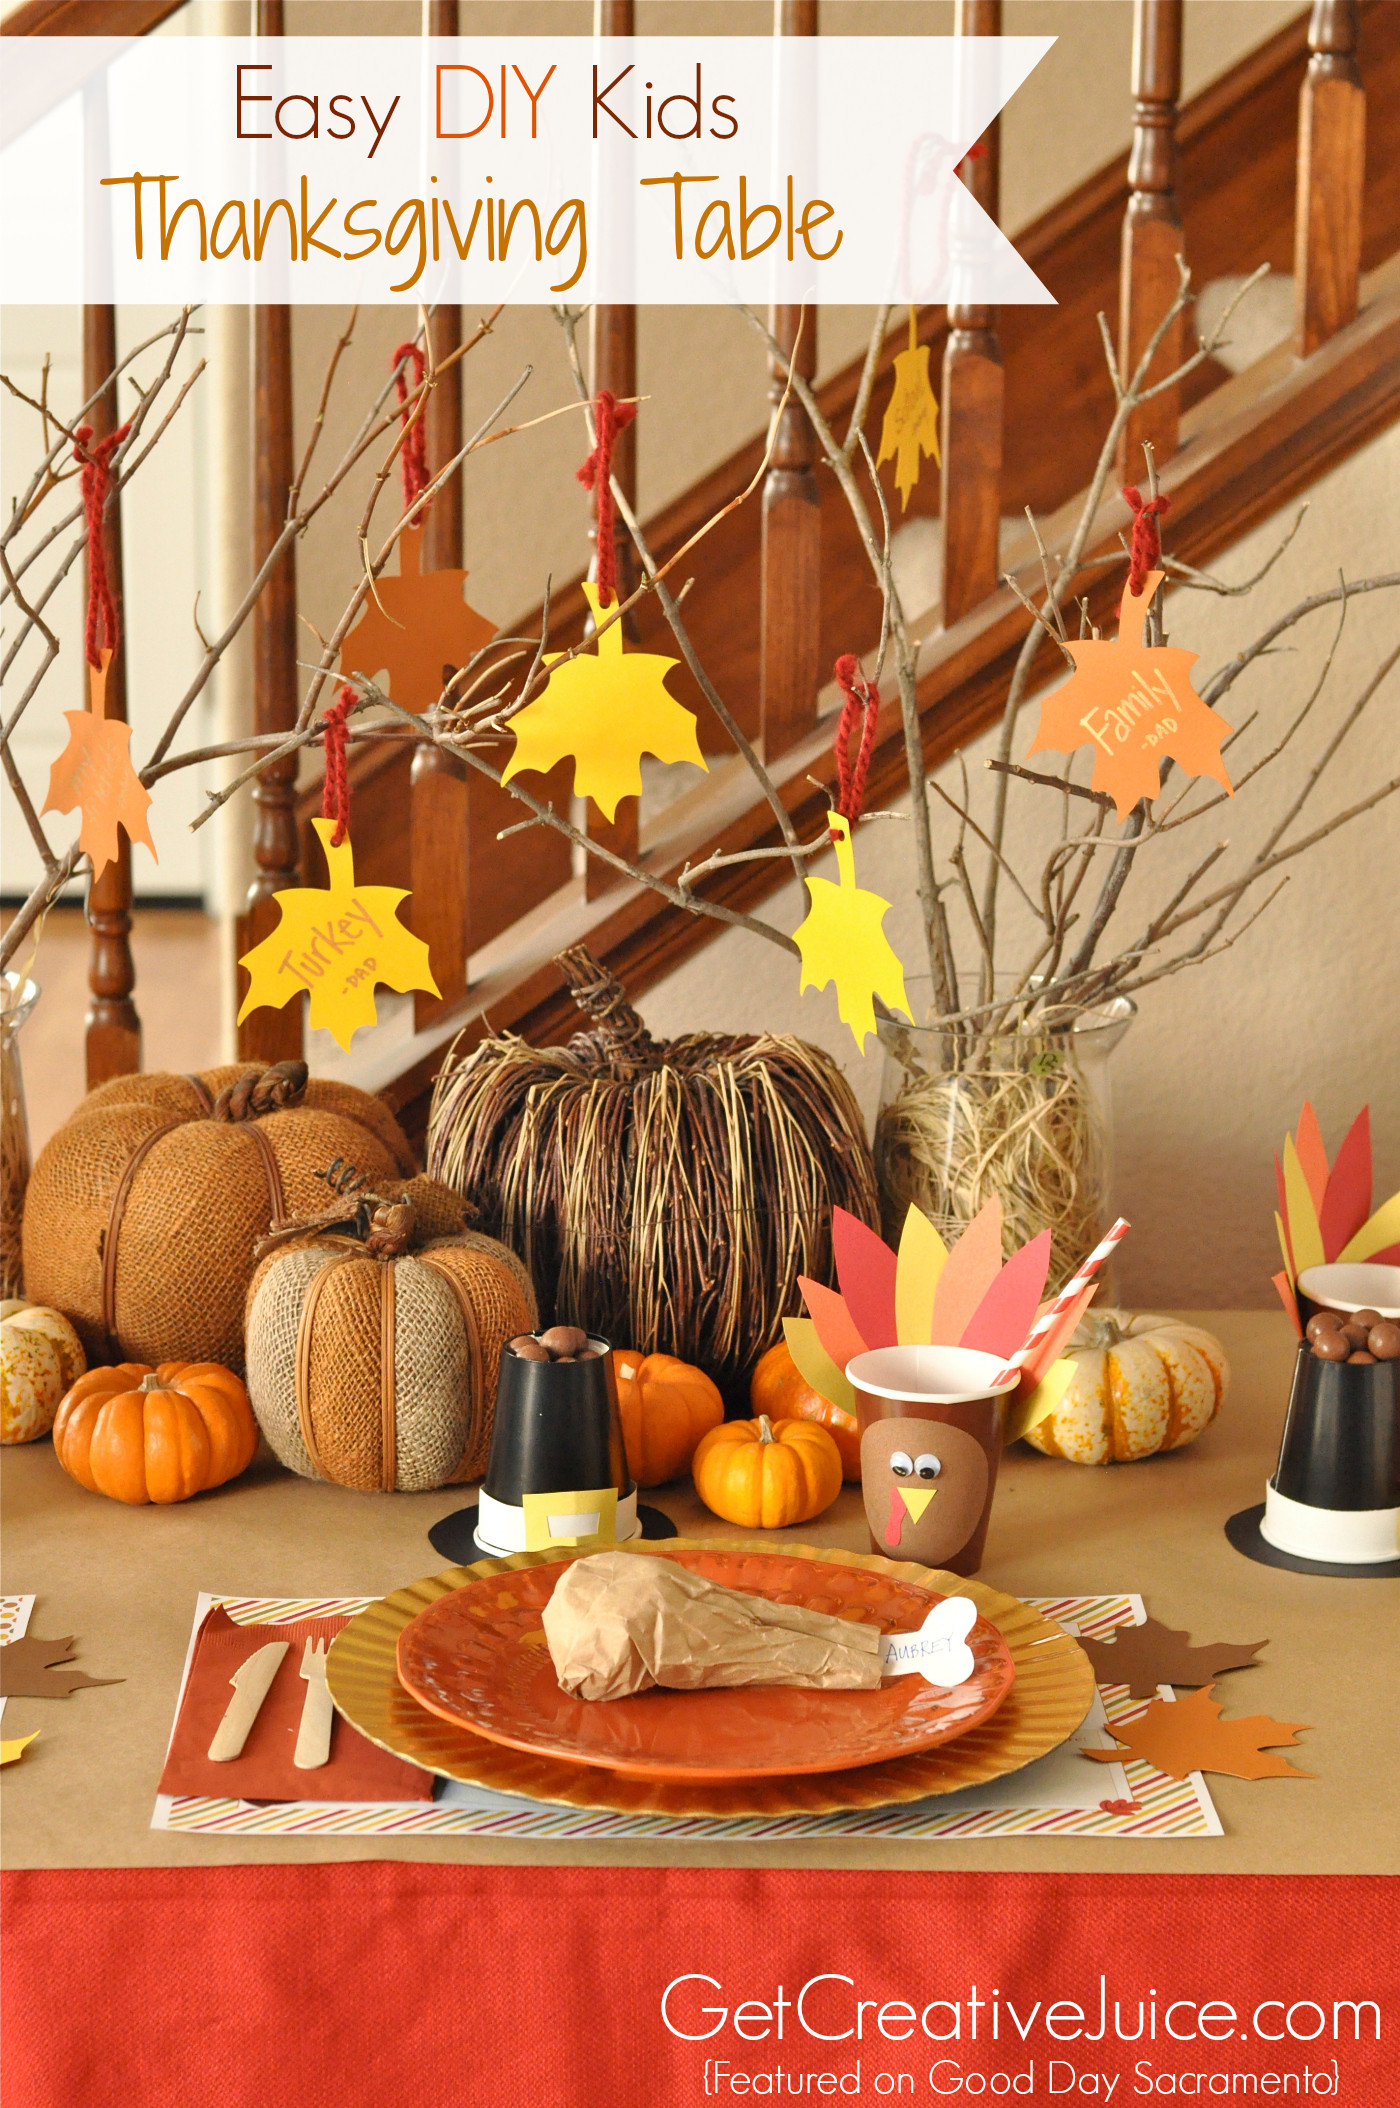 Easy Thanksgiving Table Decorations
 Easy DIY Kids Thanksgiving Table Ideas Creative Juice